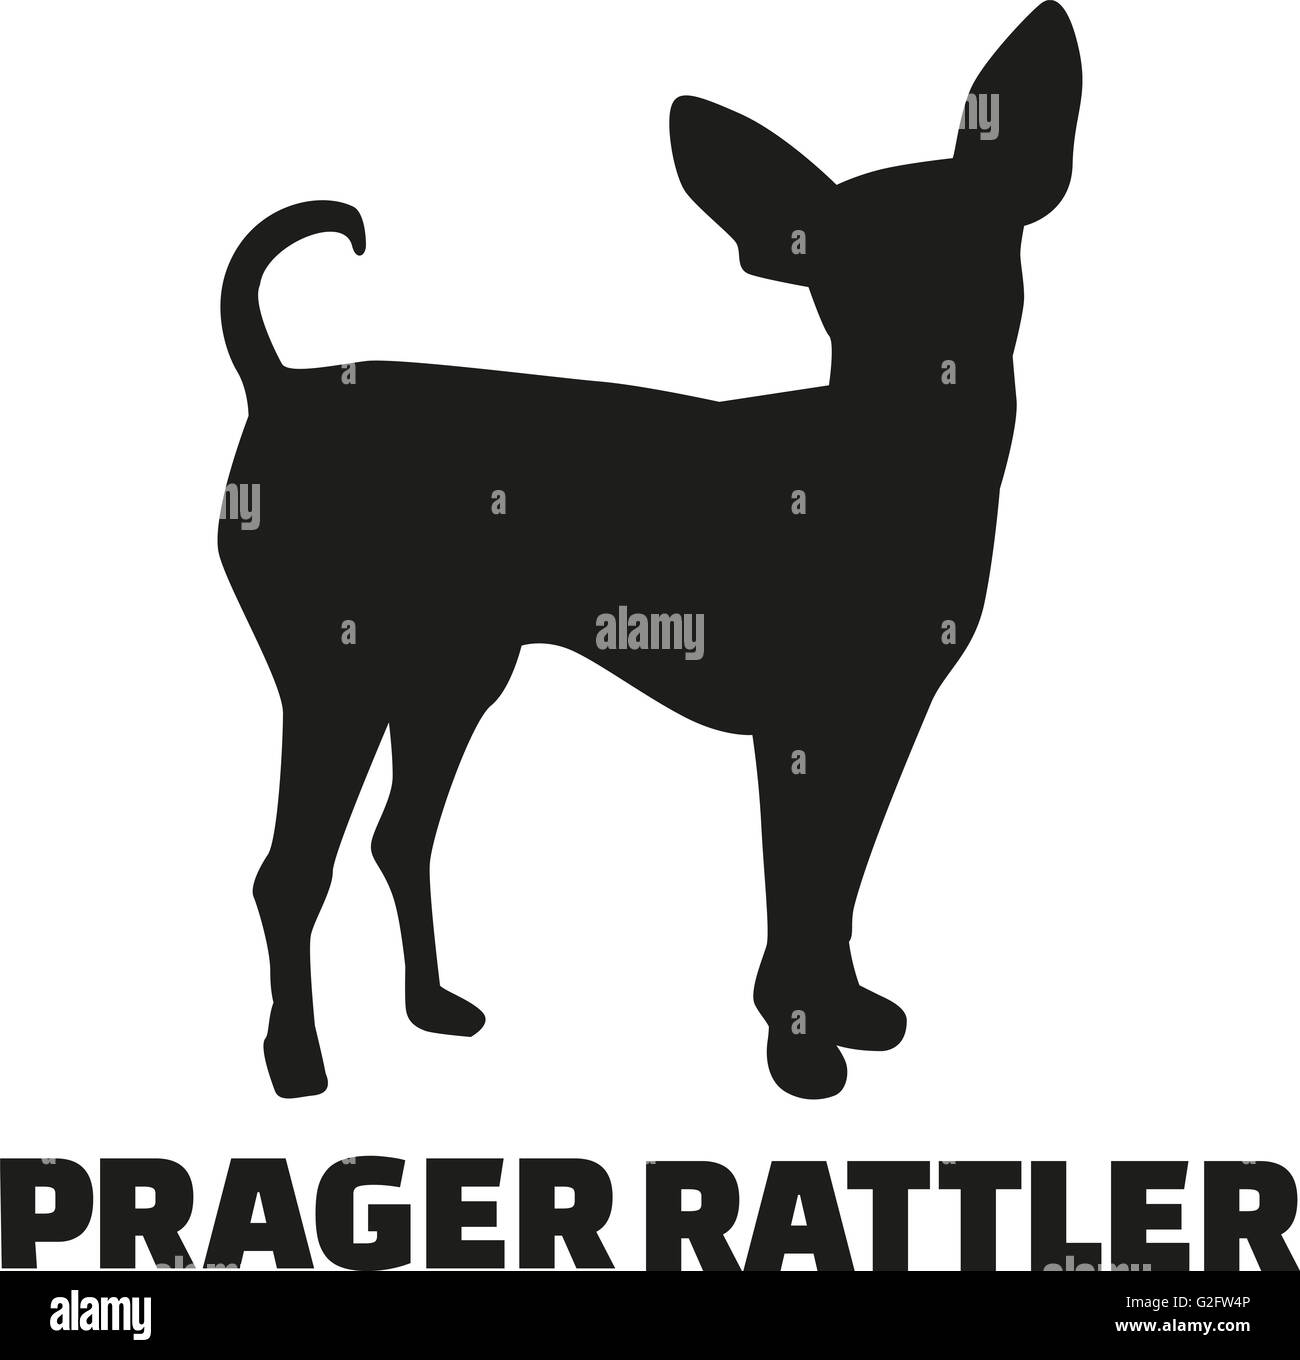 Prague ratter with german breed name Stock Photo